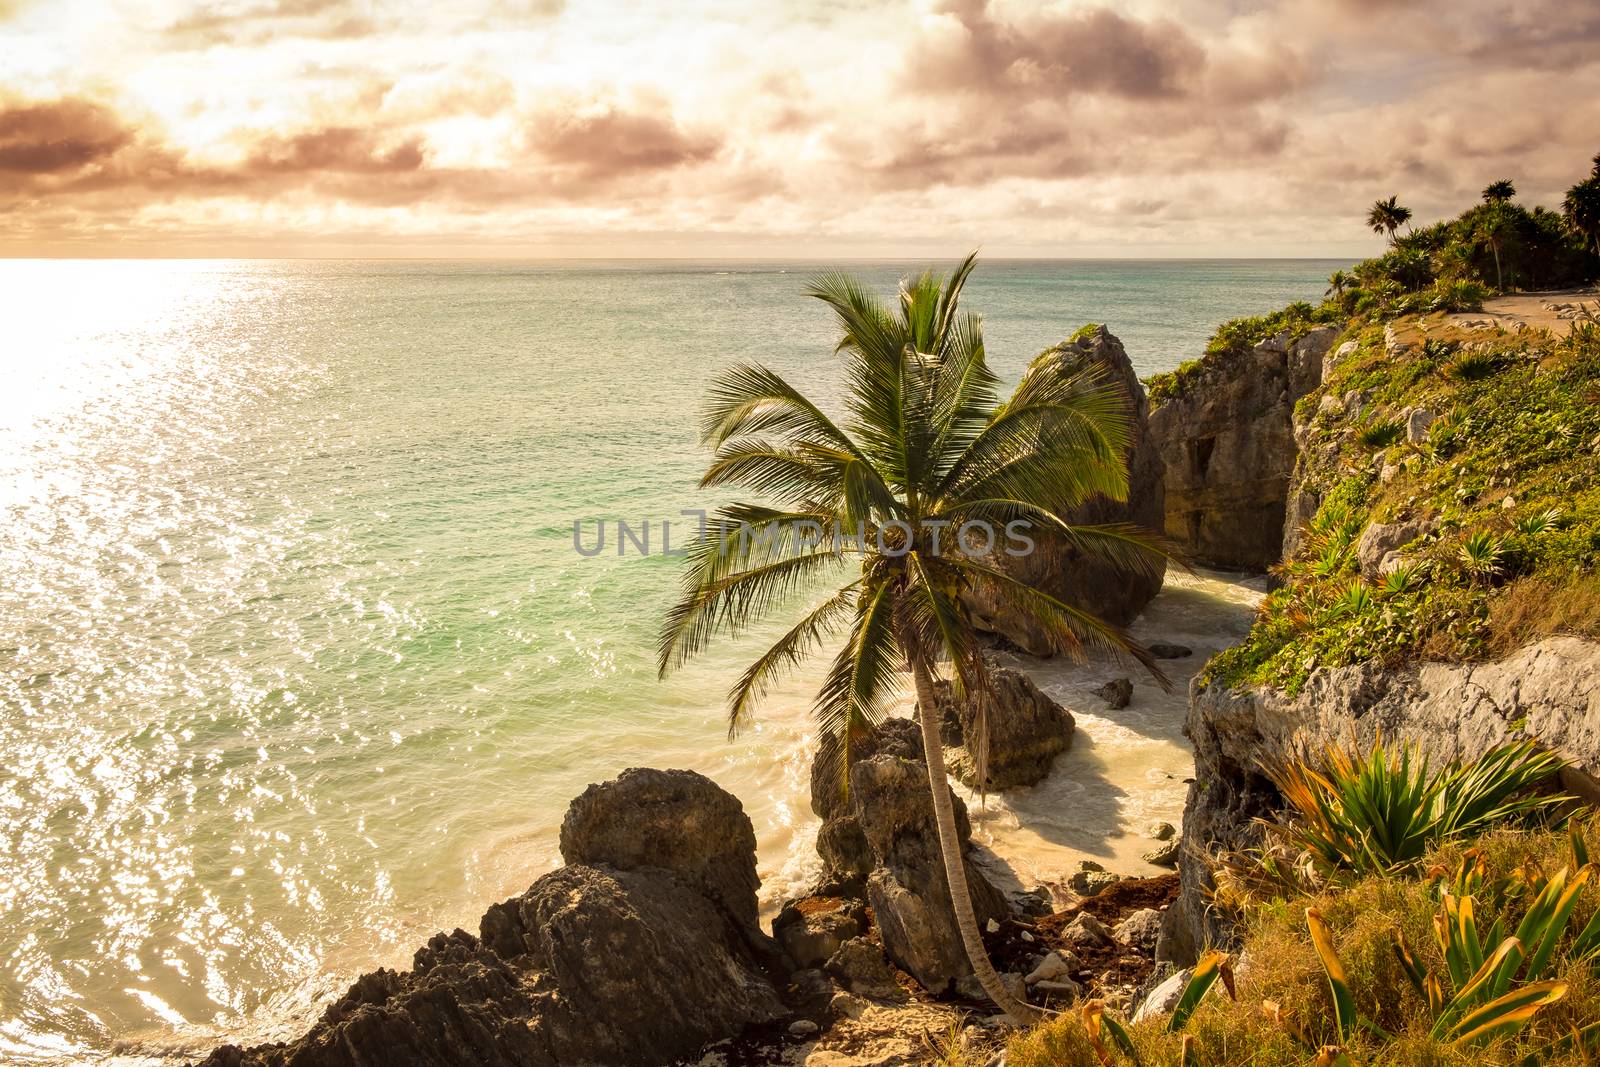 Rocky ocean coastline with beach and palm trees, Mexico by martinm303